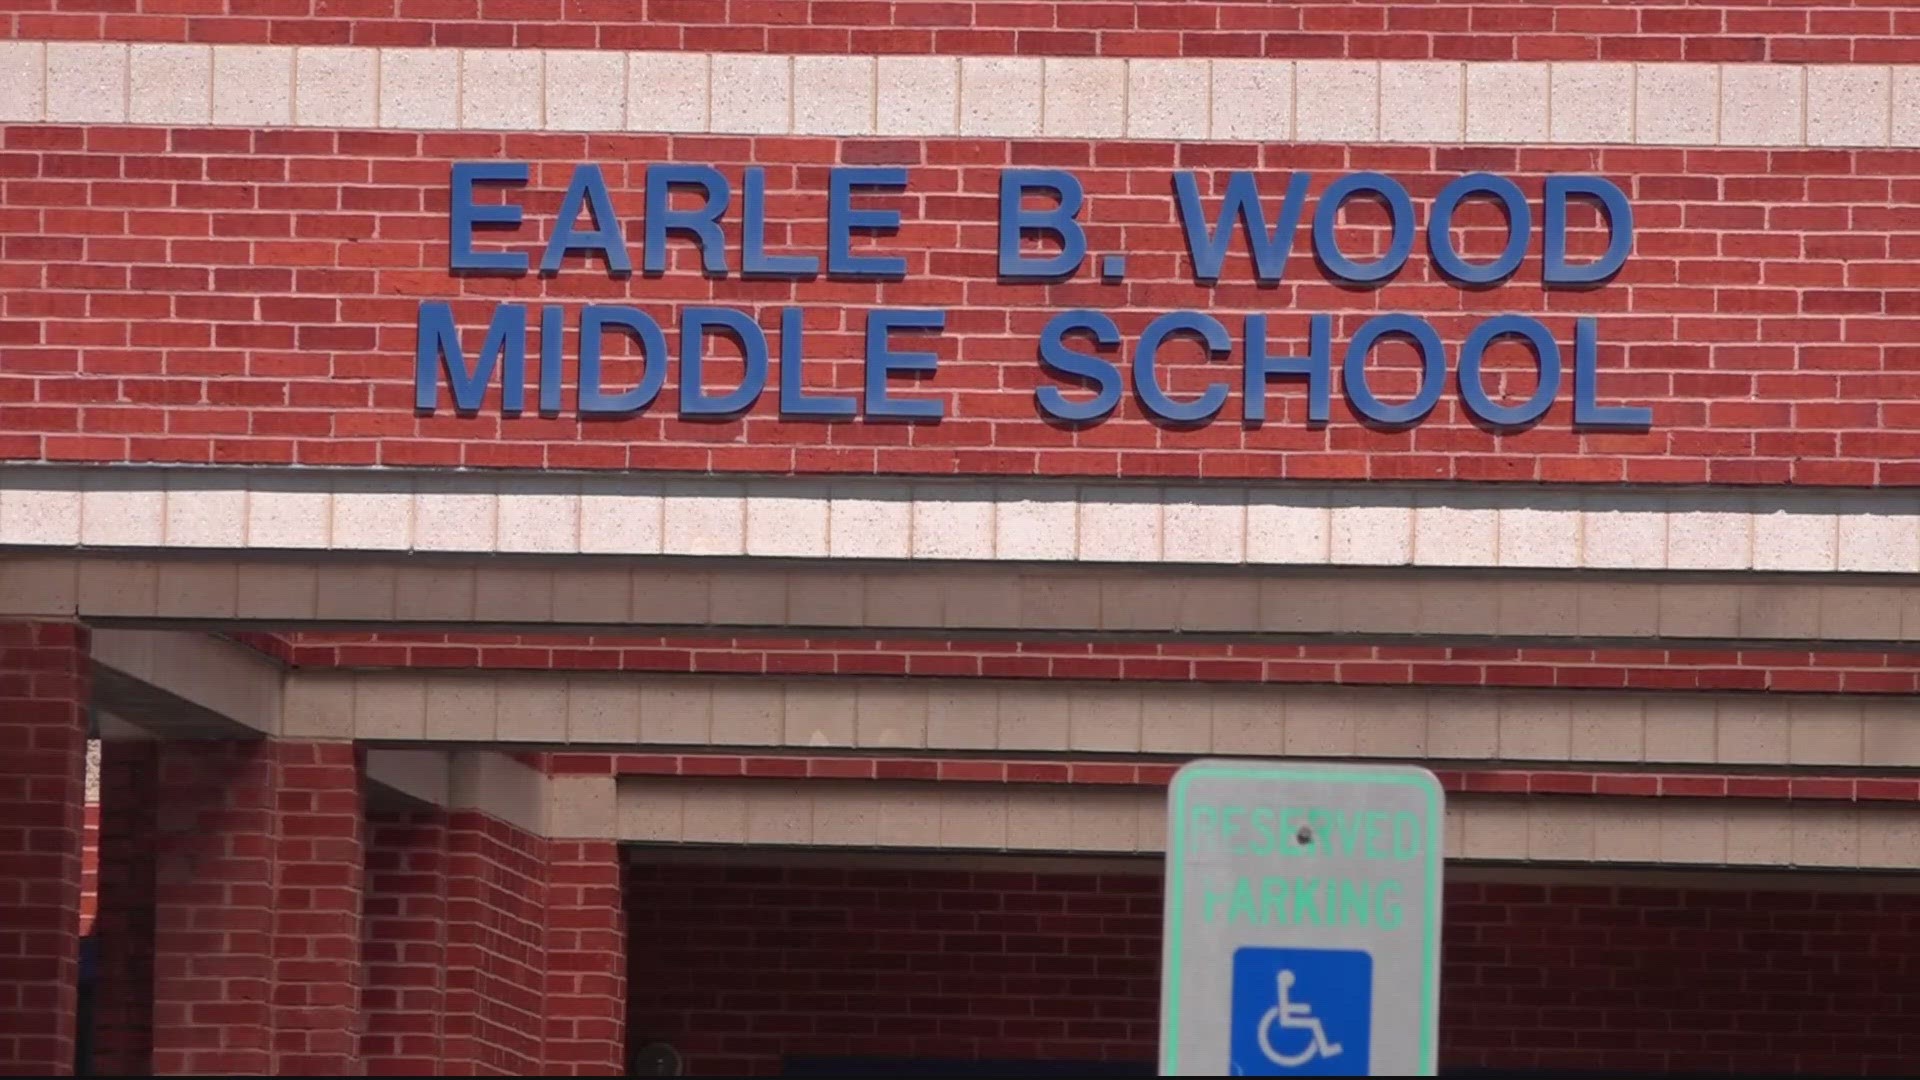 The incident happened last year at Earle B. Woods Middle School.